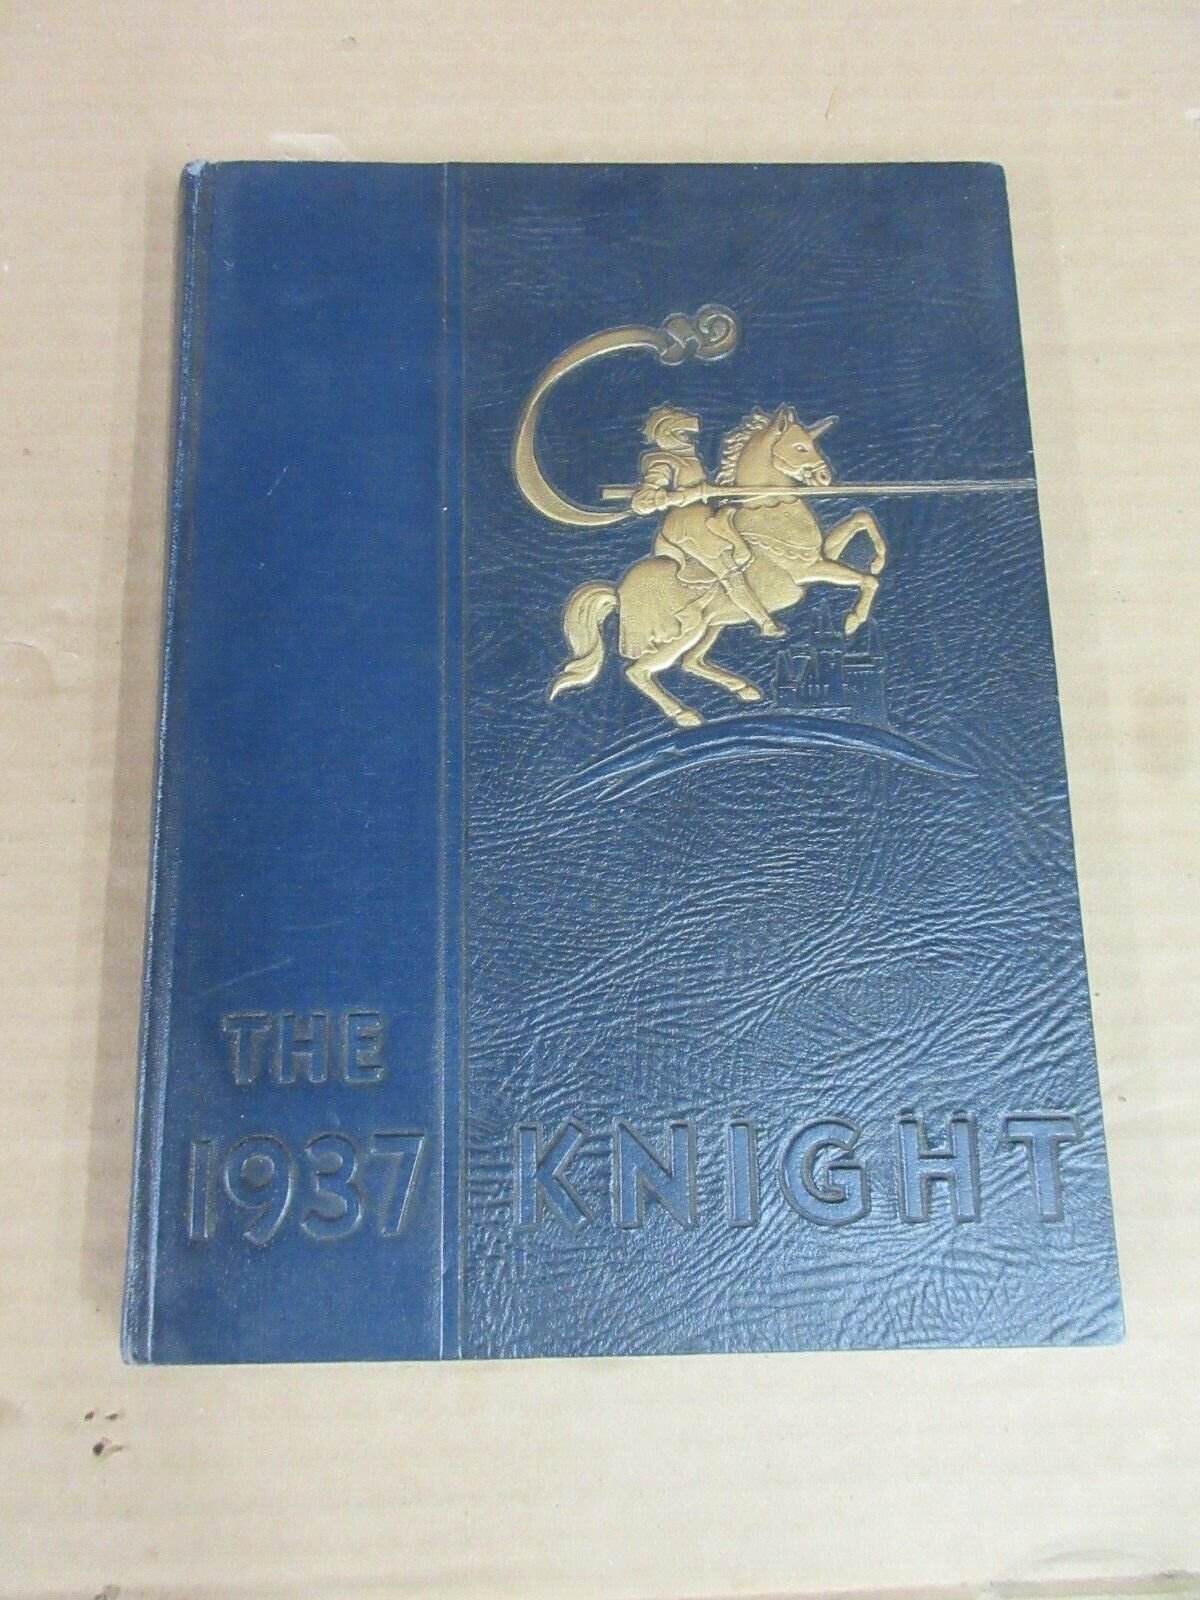 Vintage The Knight 1937 Yearbook Collingswood High School Collingswood NJ